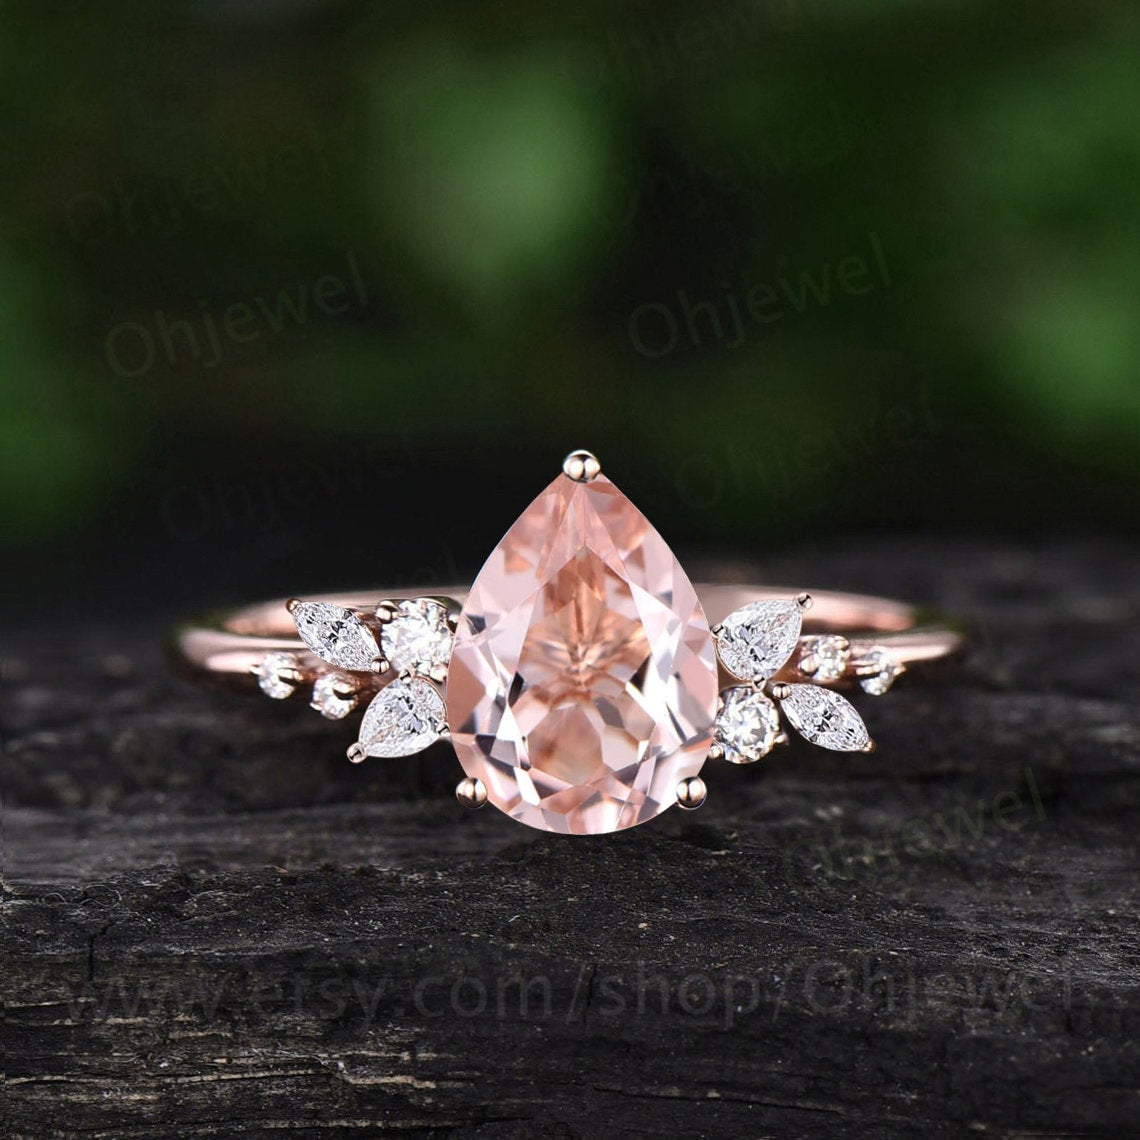 Unique pear shaped morganite engagement ring solid 14k rose gold cluster snowdrift diamond bridal promise wedding anniversary ring women